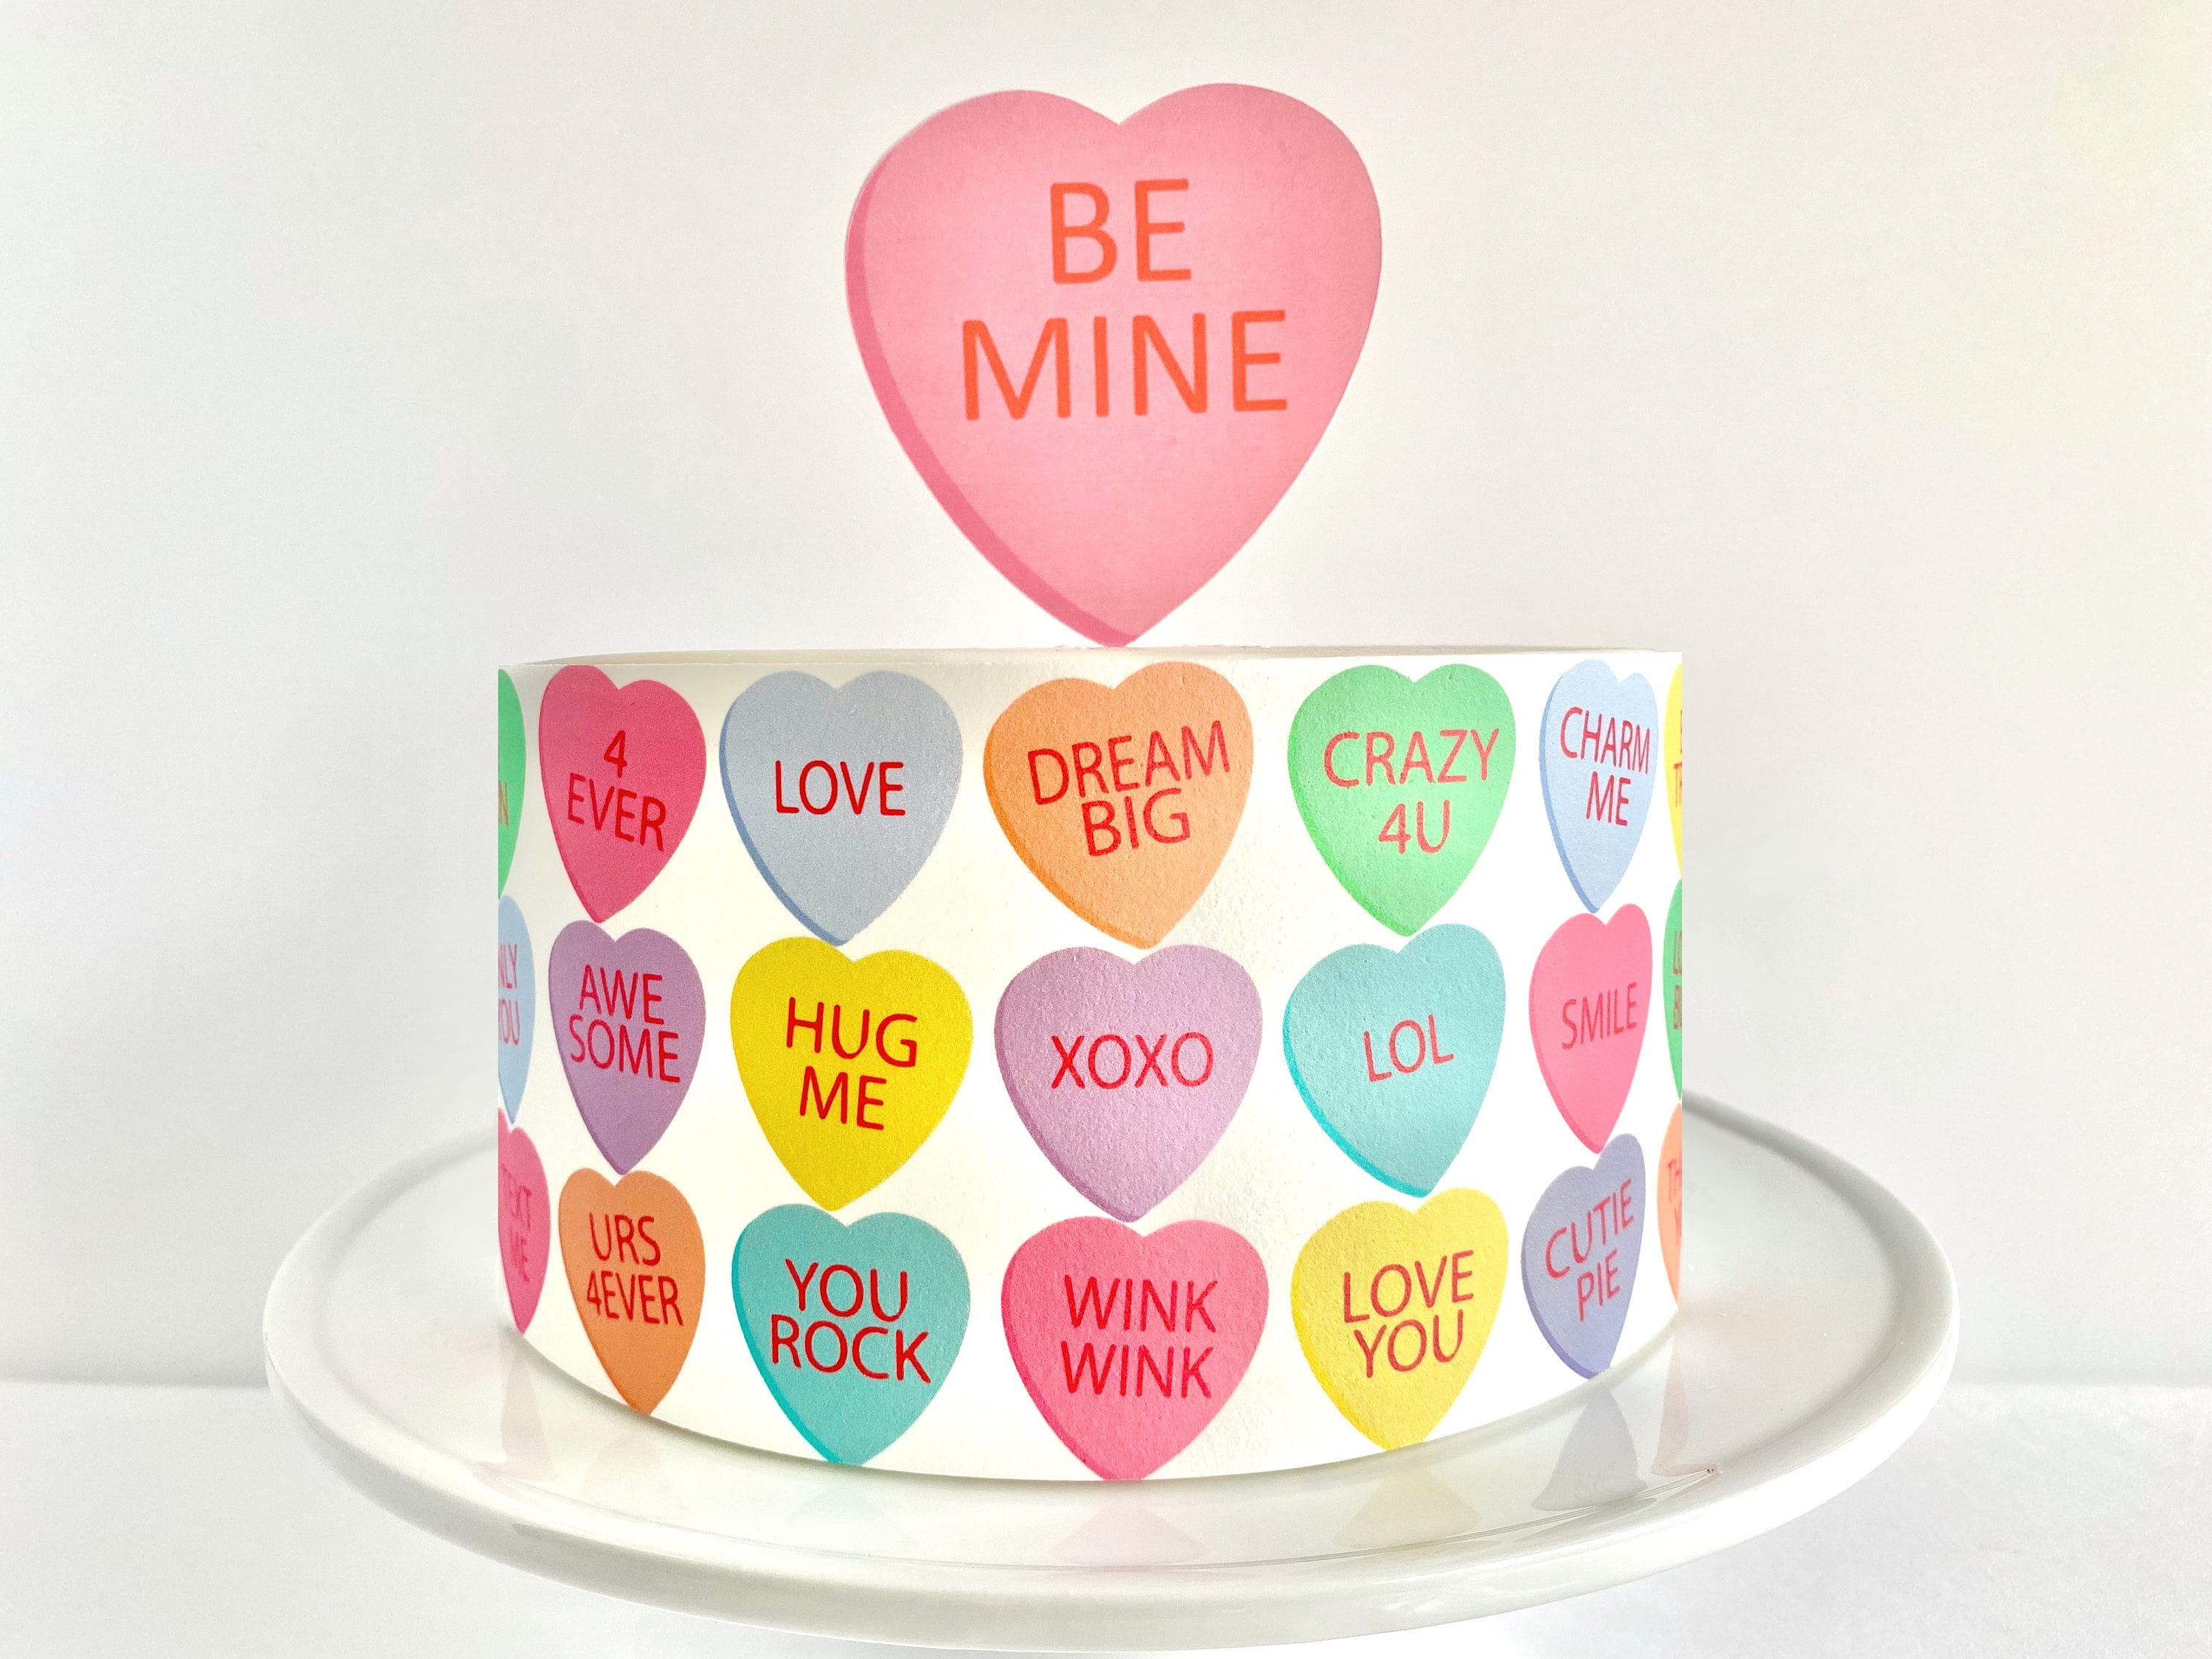 FAQ about the letters I use on heart cakes: Yes, they are edible